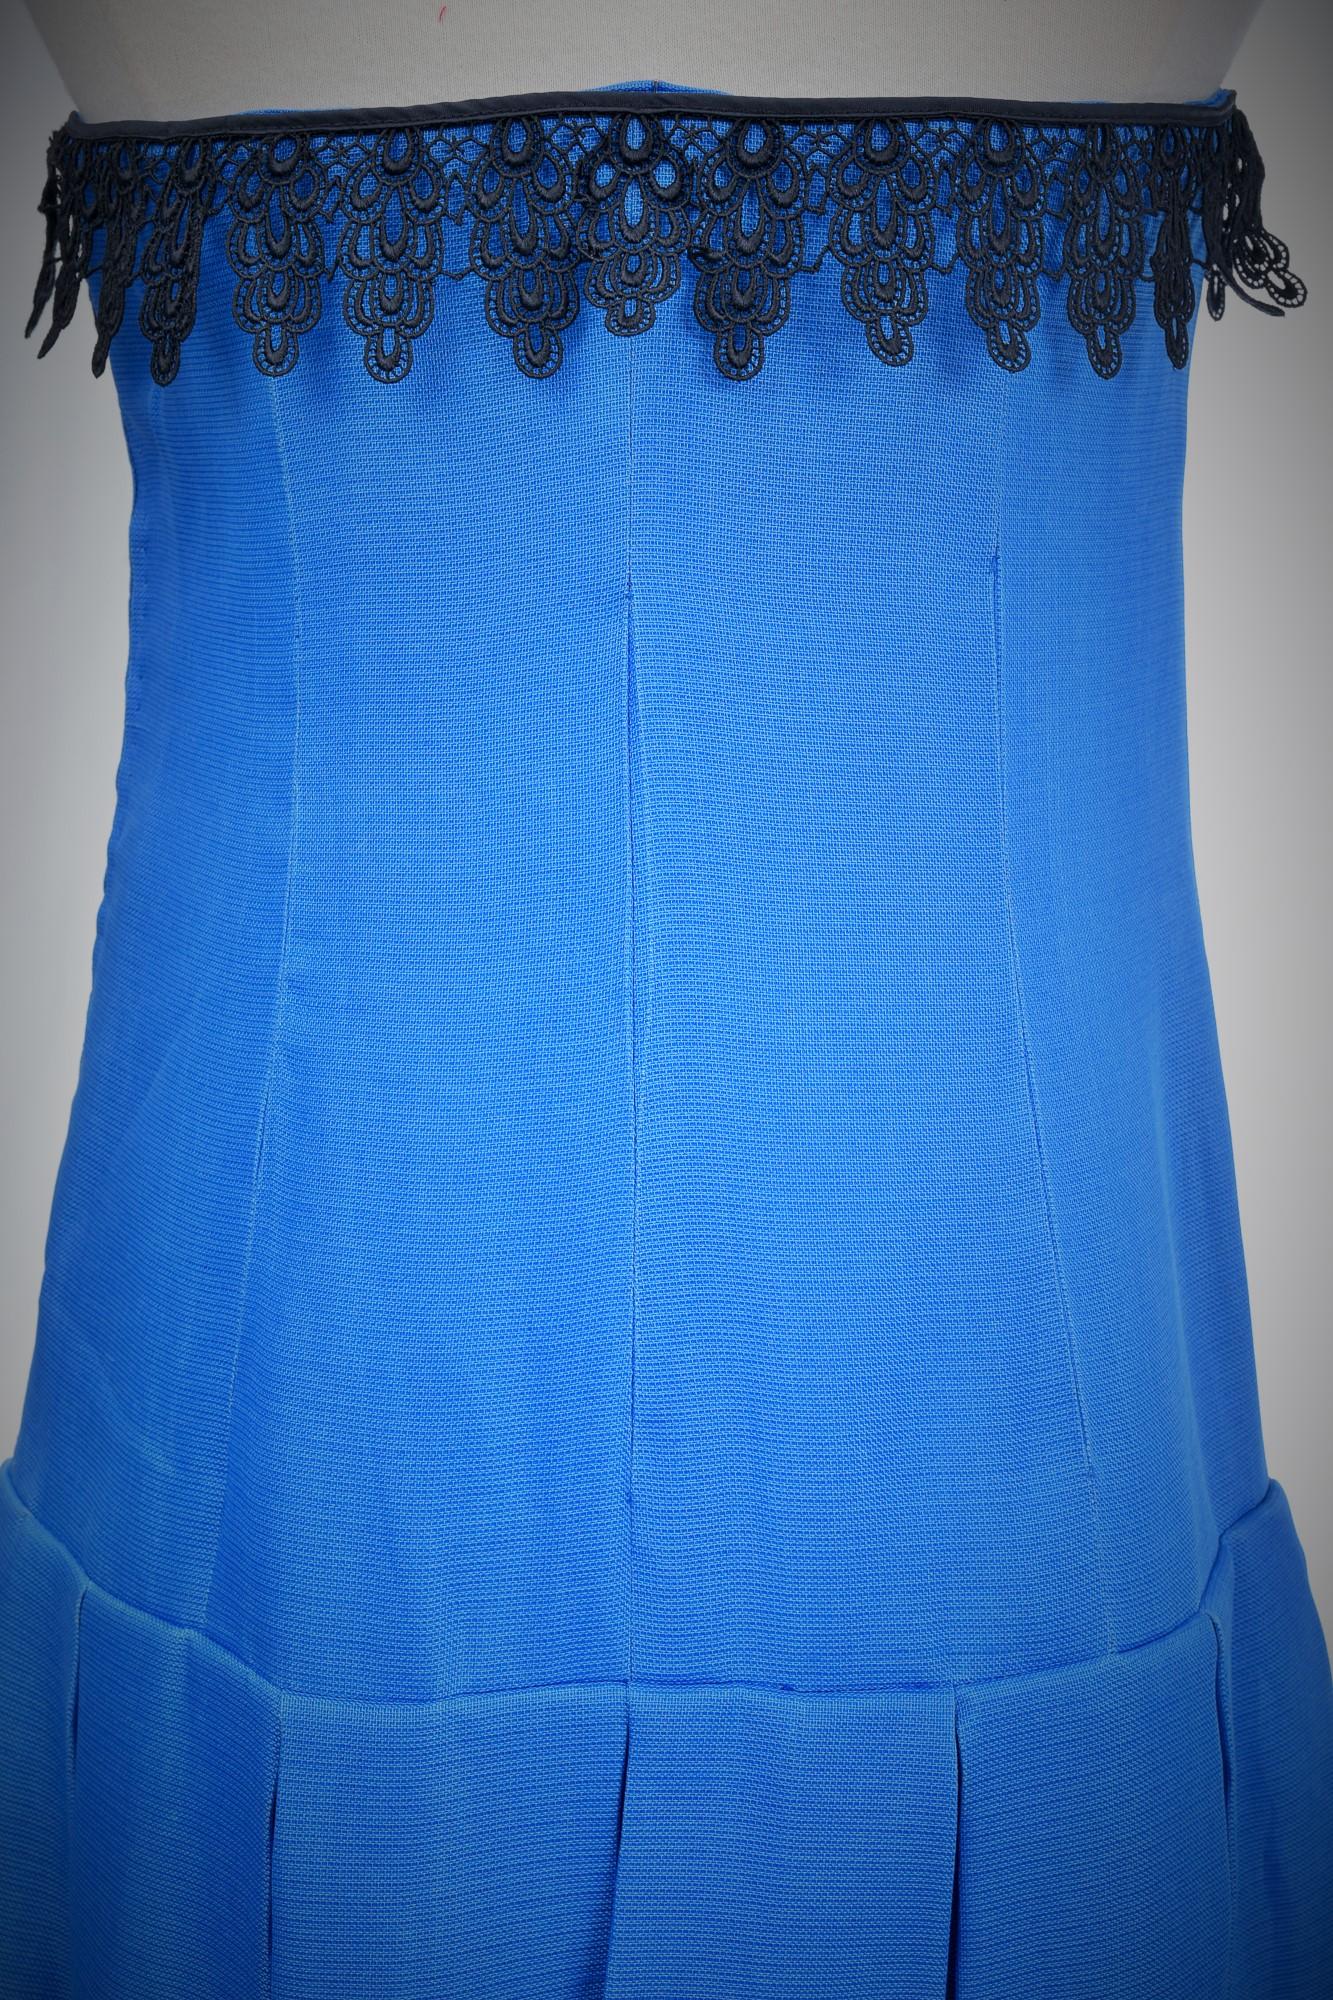 Hubert de Givenchy Cocktail Dress in Gazar Silk and Lace Circa 1968/1970 For Sale 10